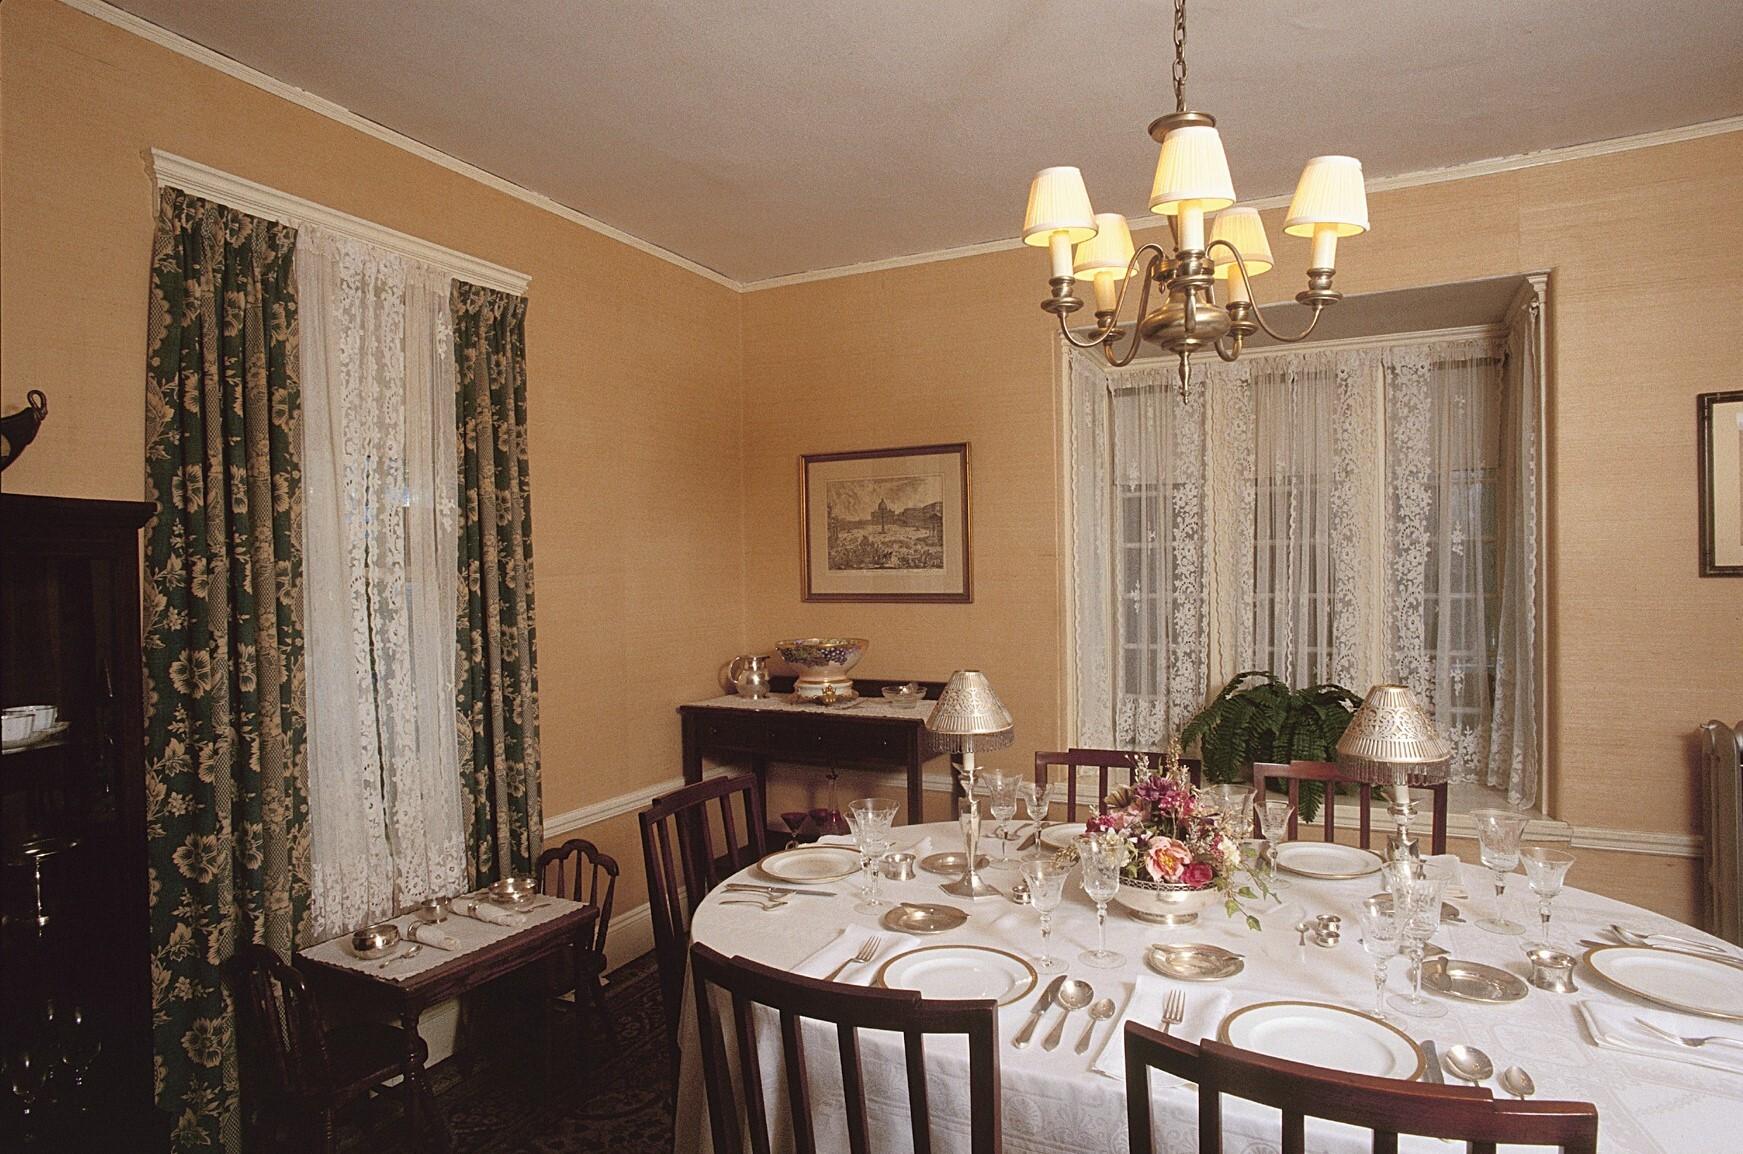 Dining room with oval dining table with six place settings of silver and fine china.